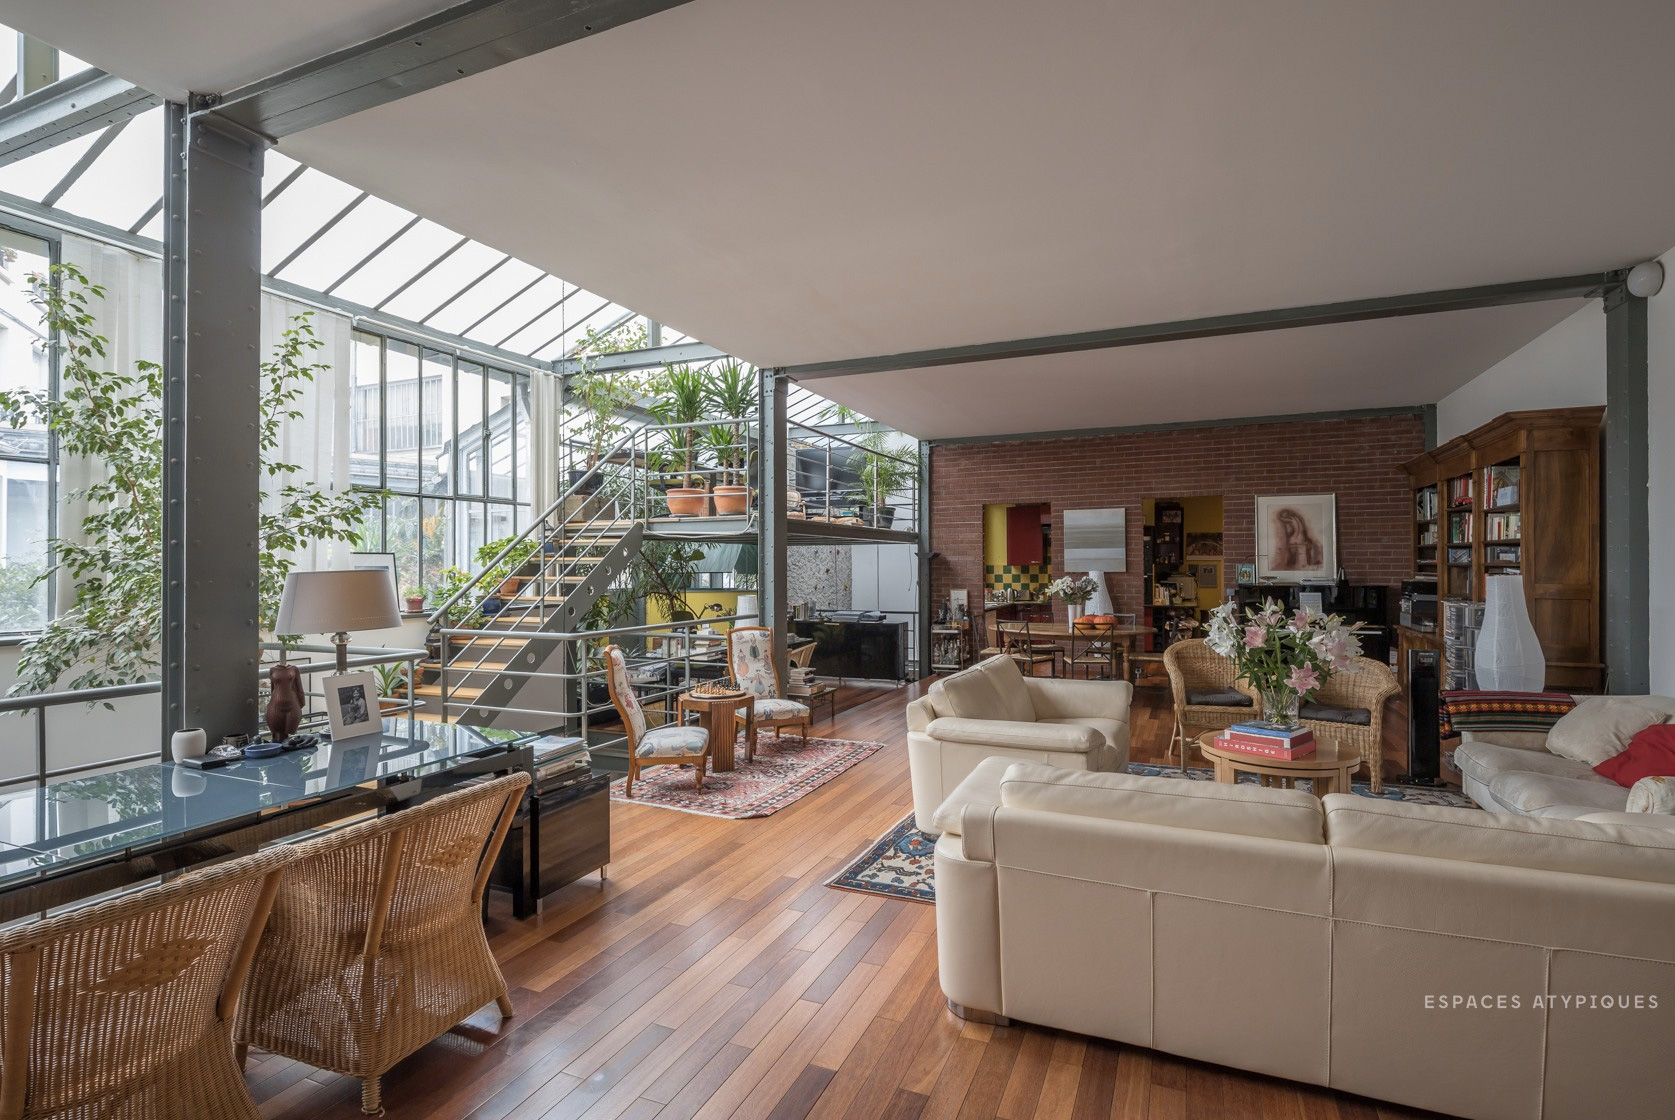 Paris home with its own climbing wall lists for €2.4m